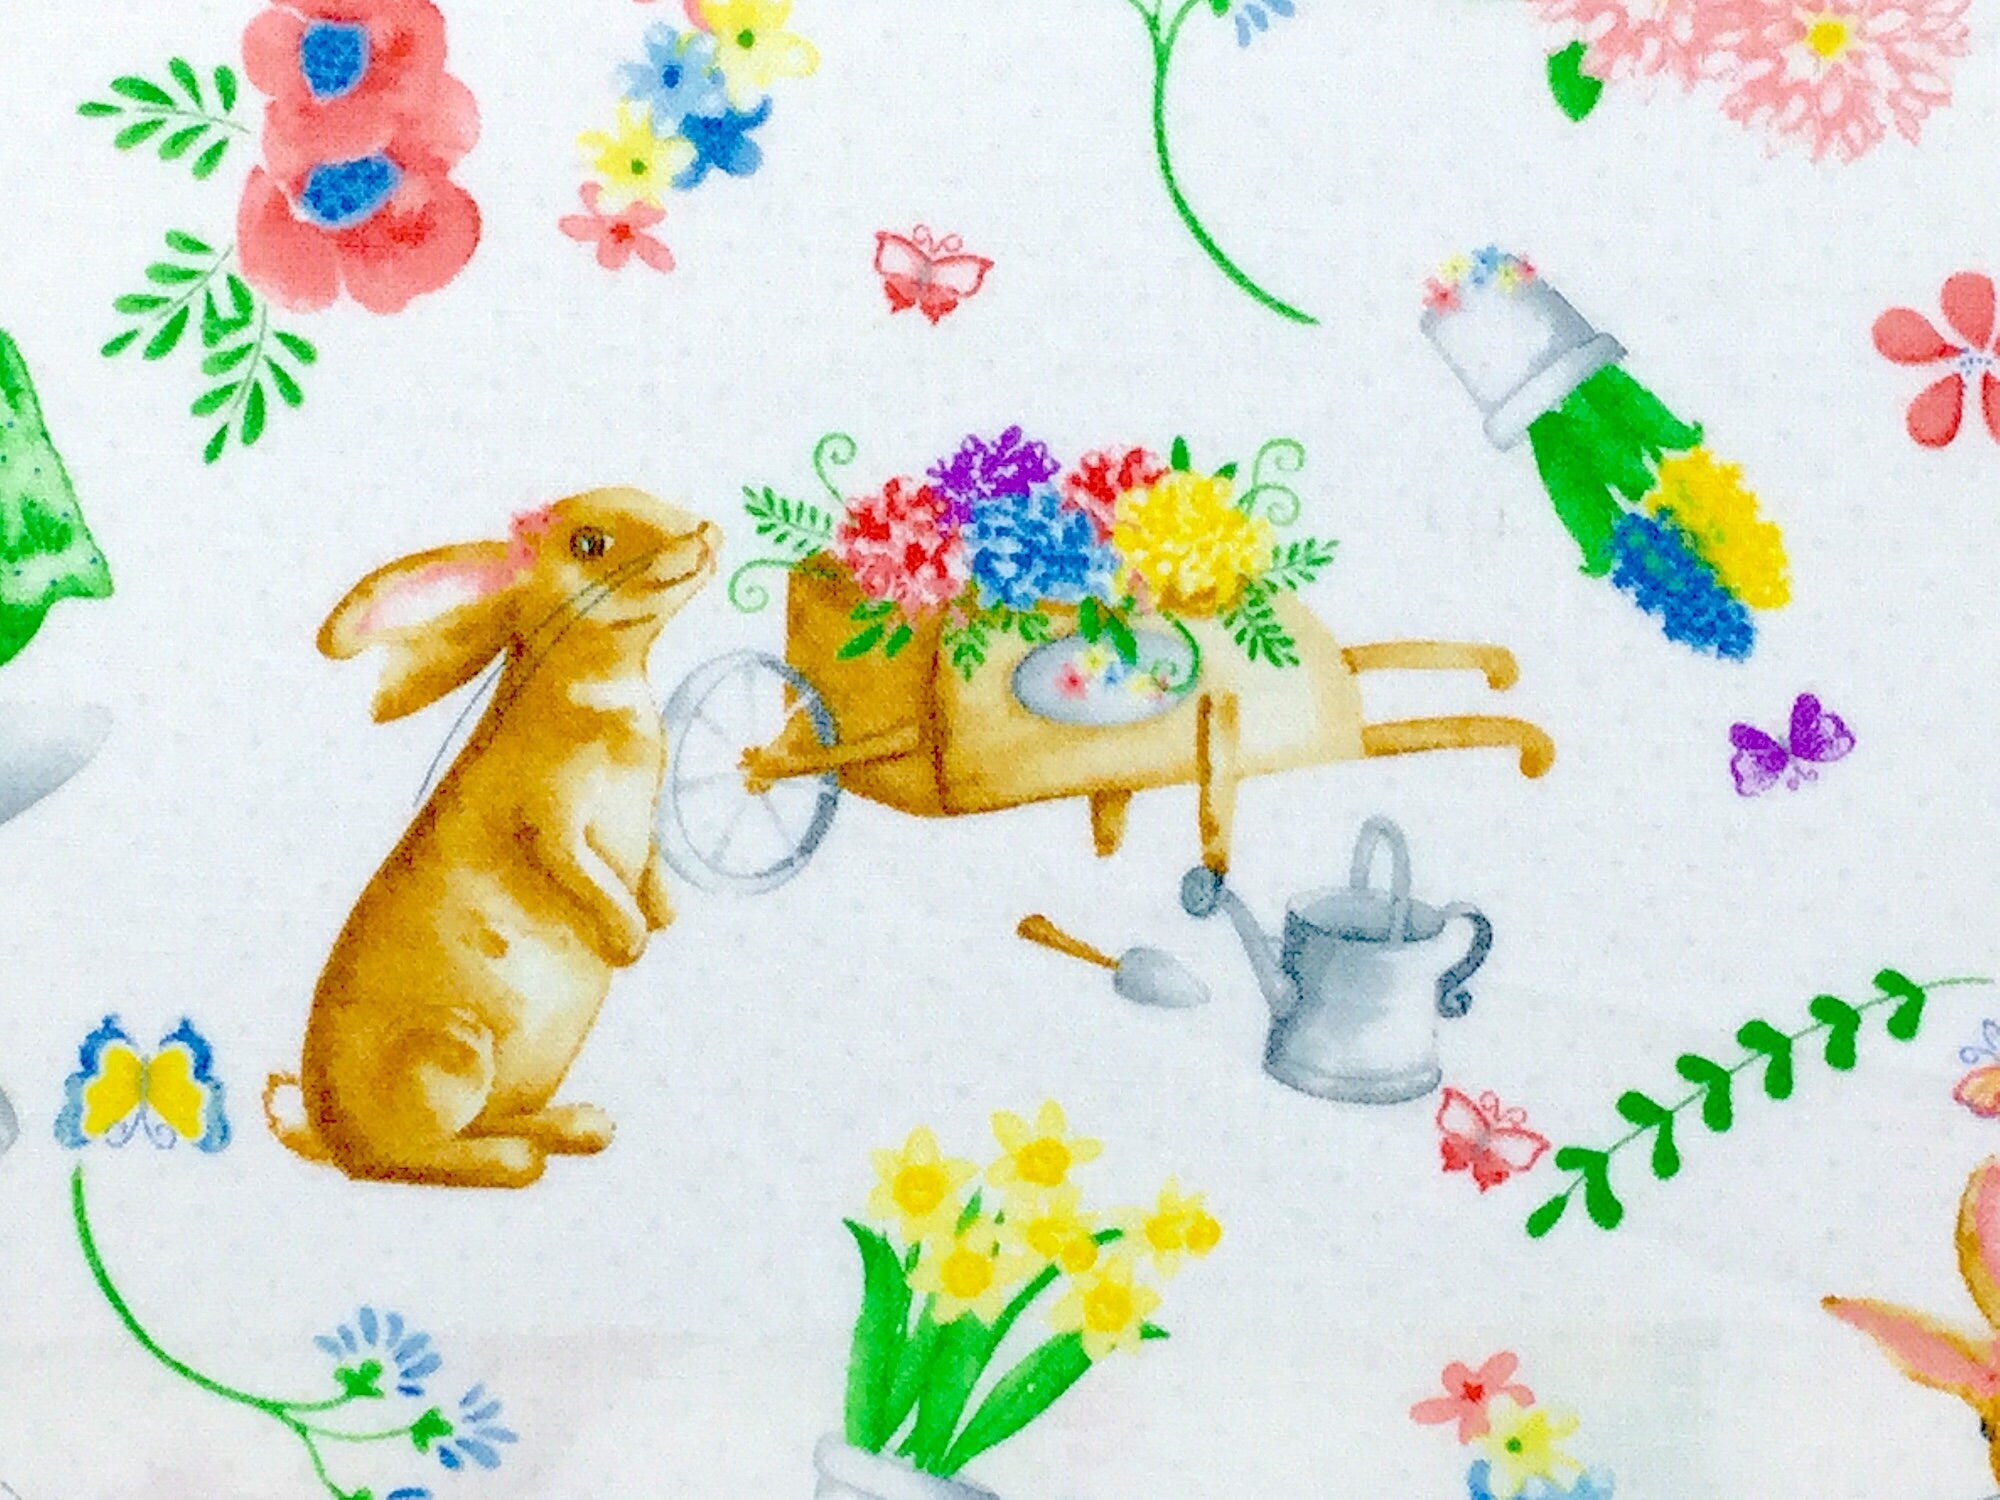 Close up of bunny, daffodils, watering can and shovels.